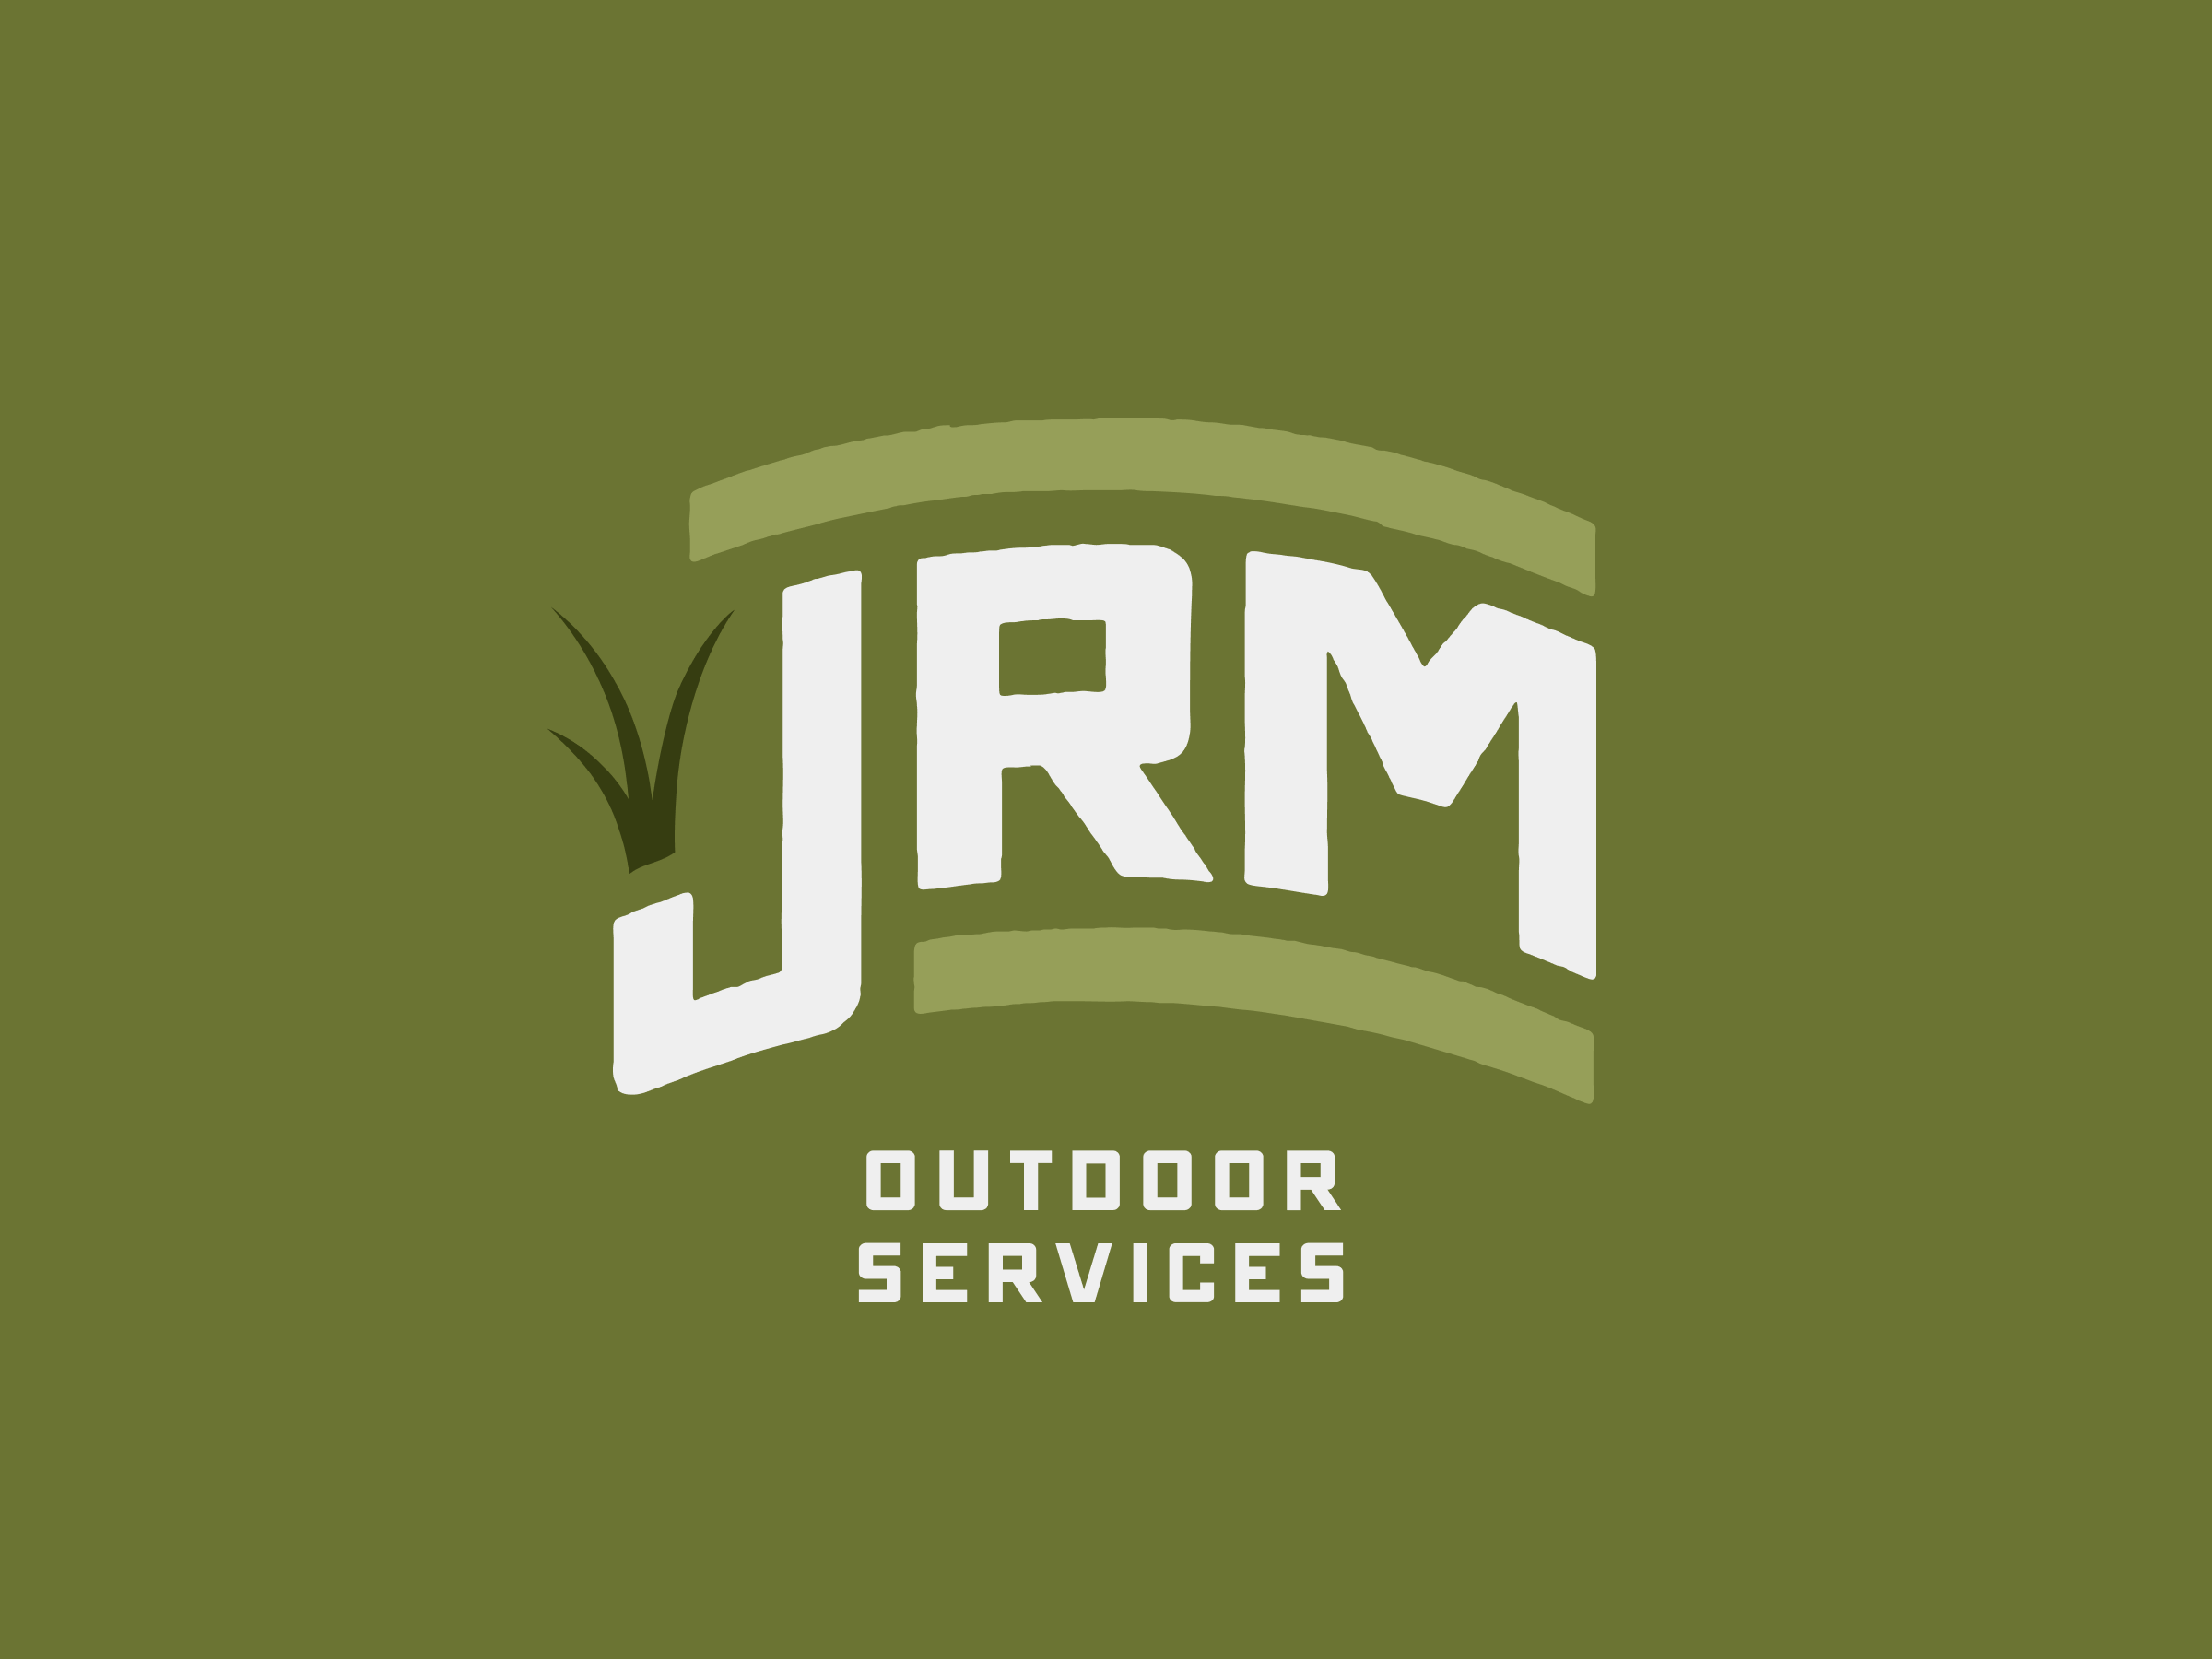 JRM Outdoor Services